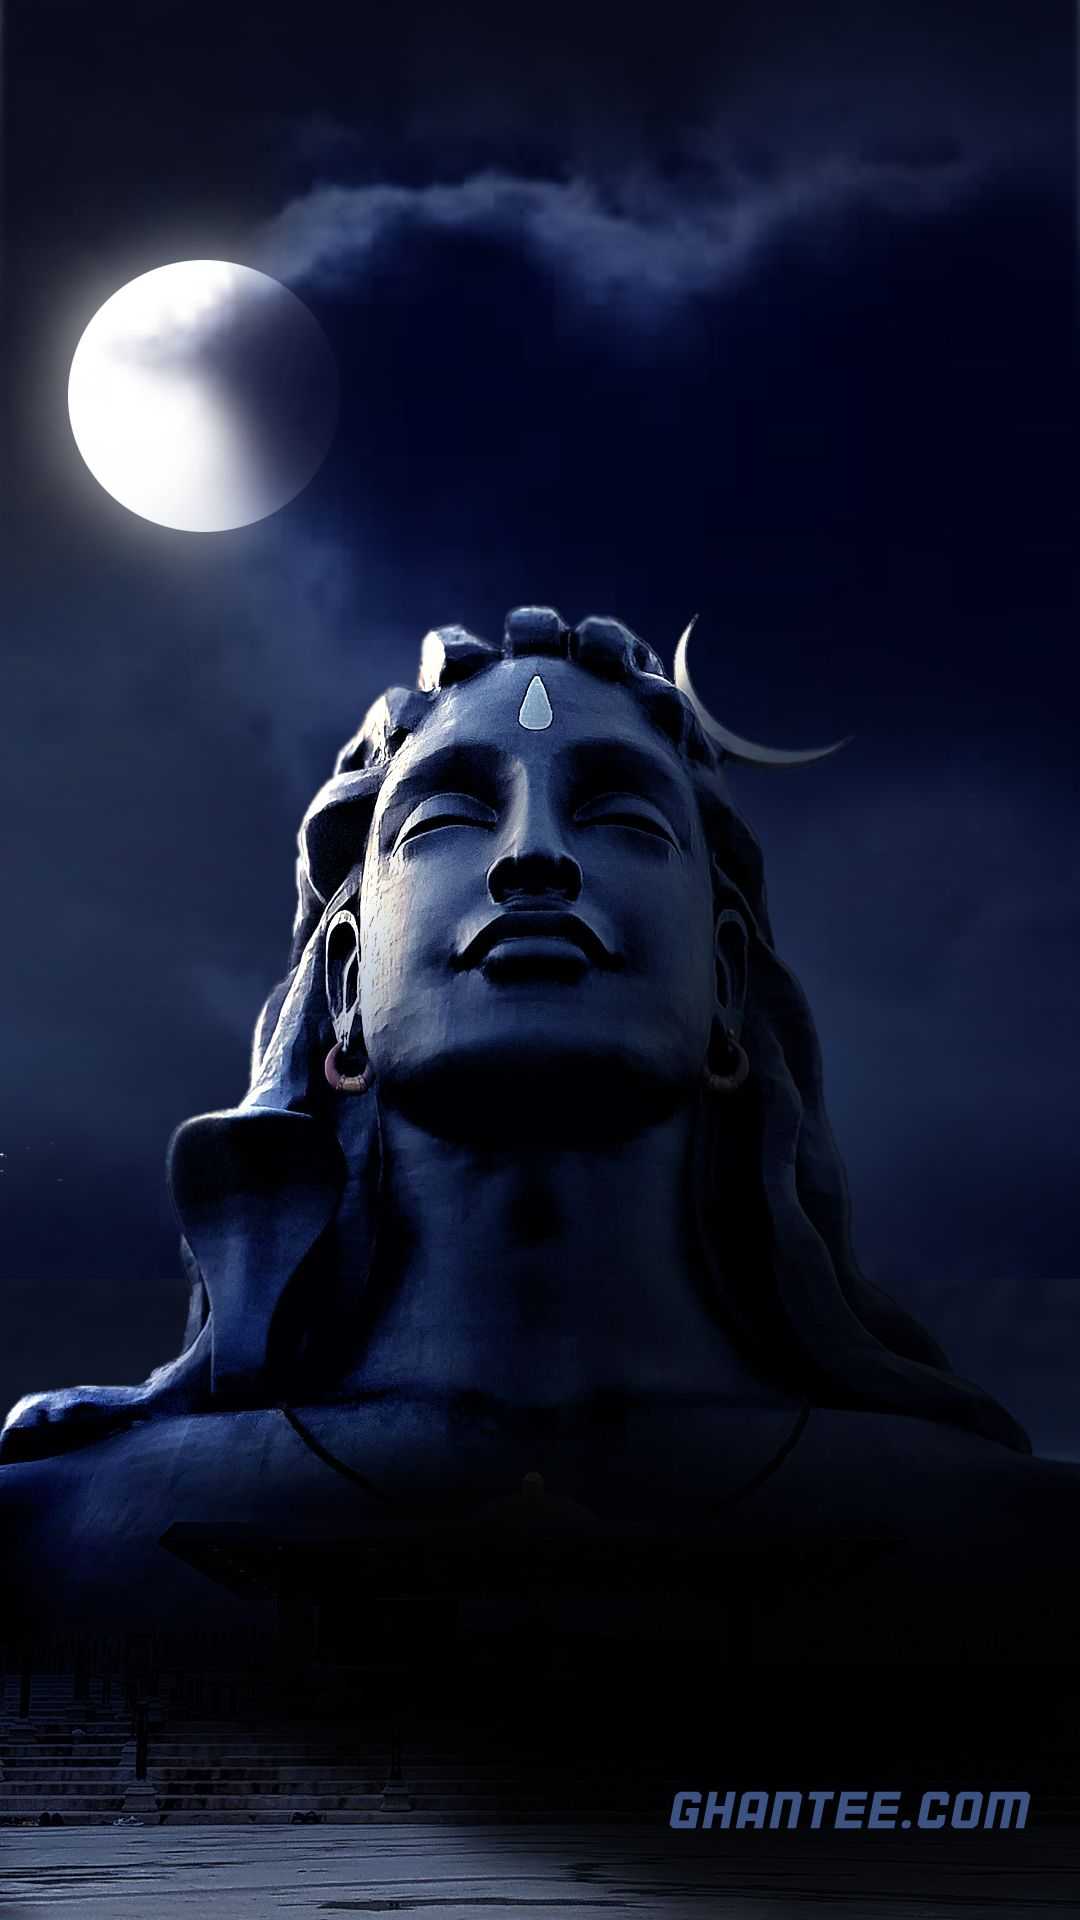 Hd Wallpapers Of Lord Shiva For Pc ~ Shiva Lord 3d Wallpaper Wallpapers Hd Touchtalent